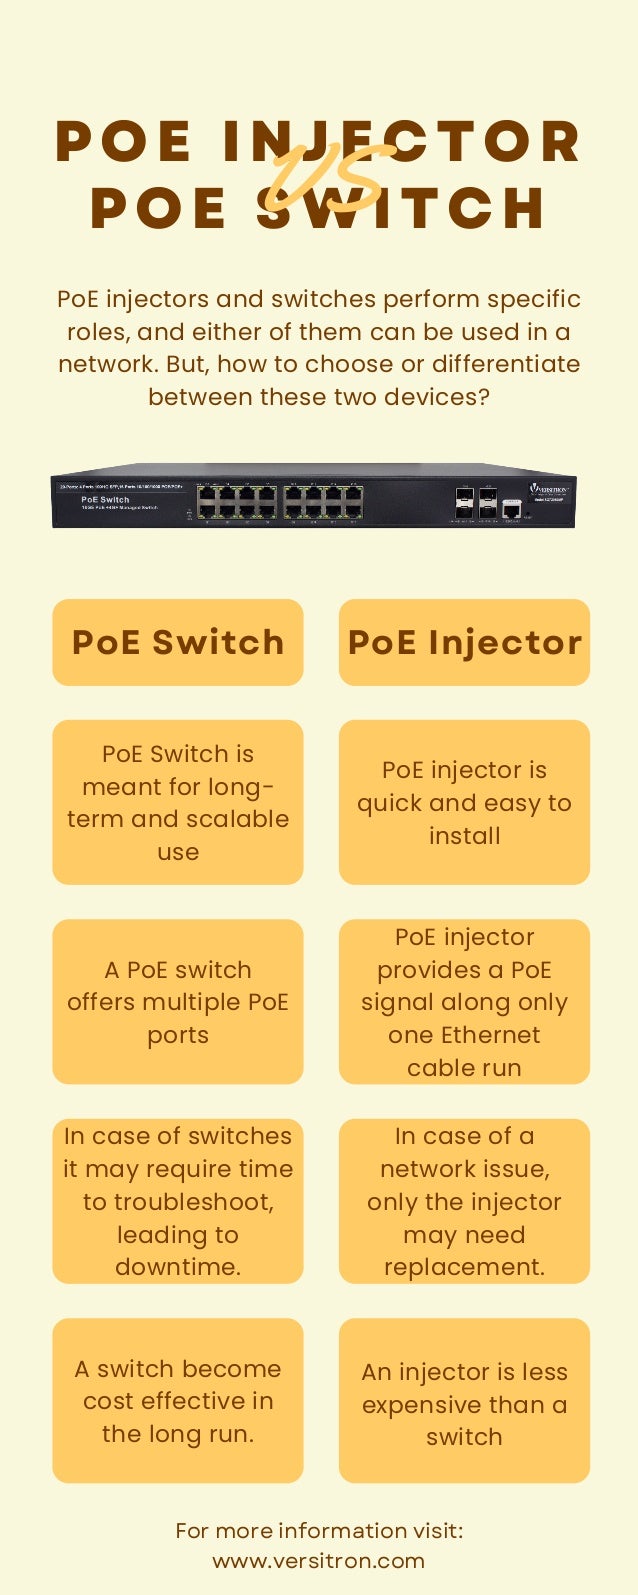 POE INJECTOR
POE SWITCH
VS
PoE Switch is
meant for long-
term and scalable
use
A PoE switch
offers multiple PoE
ports
In case of a
network issue,
only the injector
may need
replacement.
An injector is less
expensive than a
switch
PoE injector is
quick and easy to
install
PoE injector
provides a PoE
signal along only
one Ethernet
cable run
In case of switches
it may require time
to troubleshoot,
leading to
downtime.
A switch become
cost effective in
the long run.
PoE Switch PoE Injector
PoE injectors and switches perform specific
roles, and either of them can be used in a
network. But, how to choose or differentiate
between these two devices?
For more information visit:
www.versitron.com
 